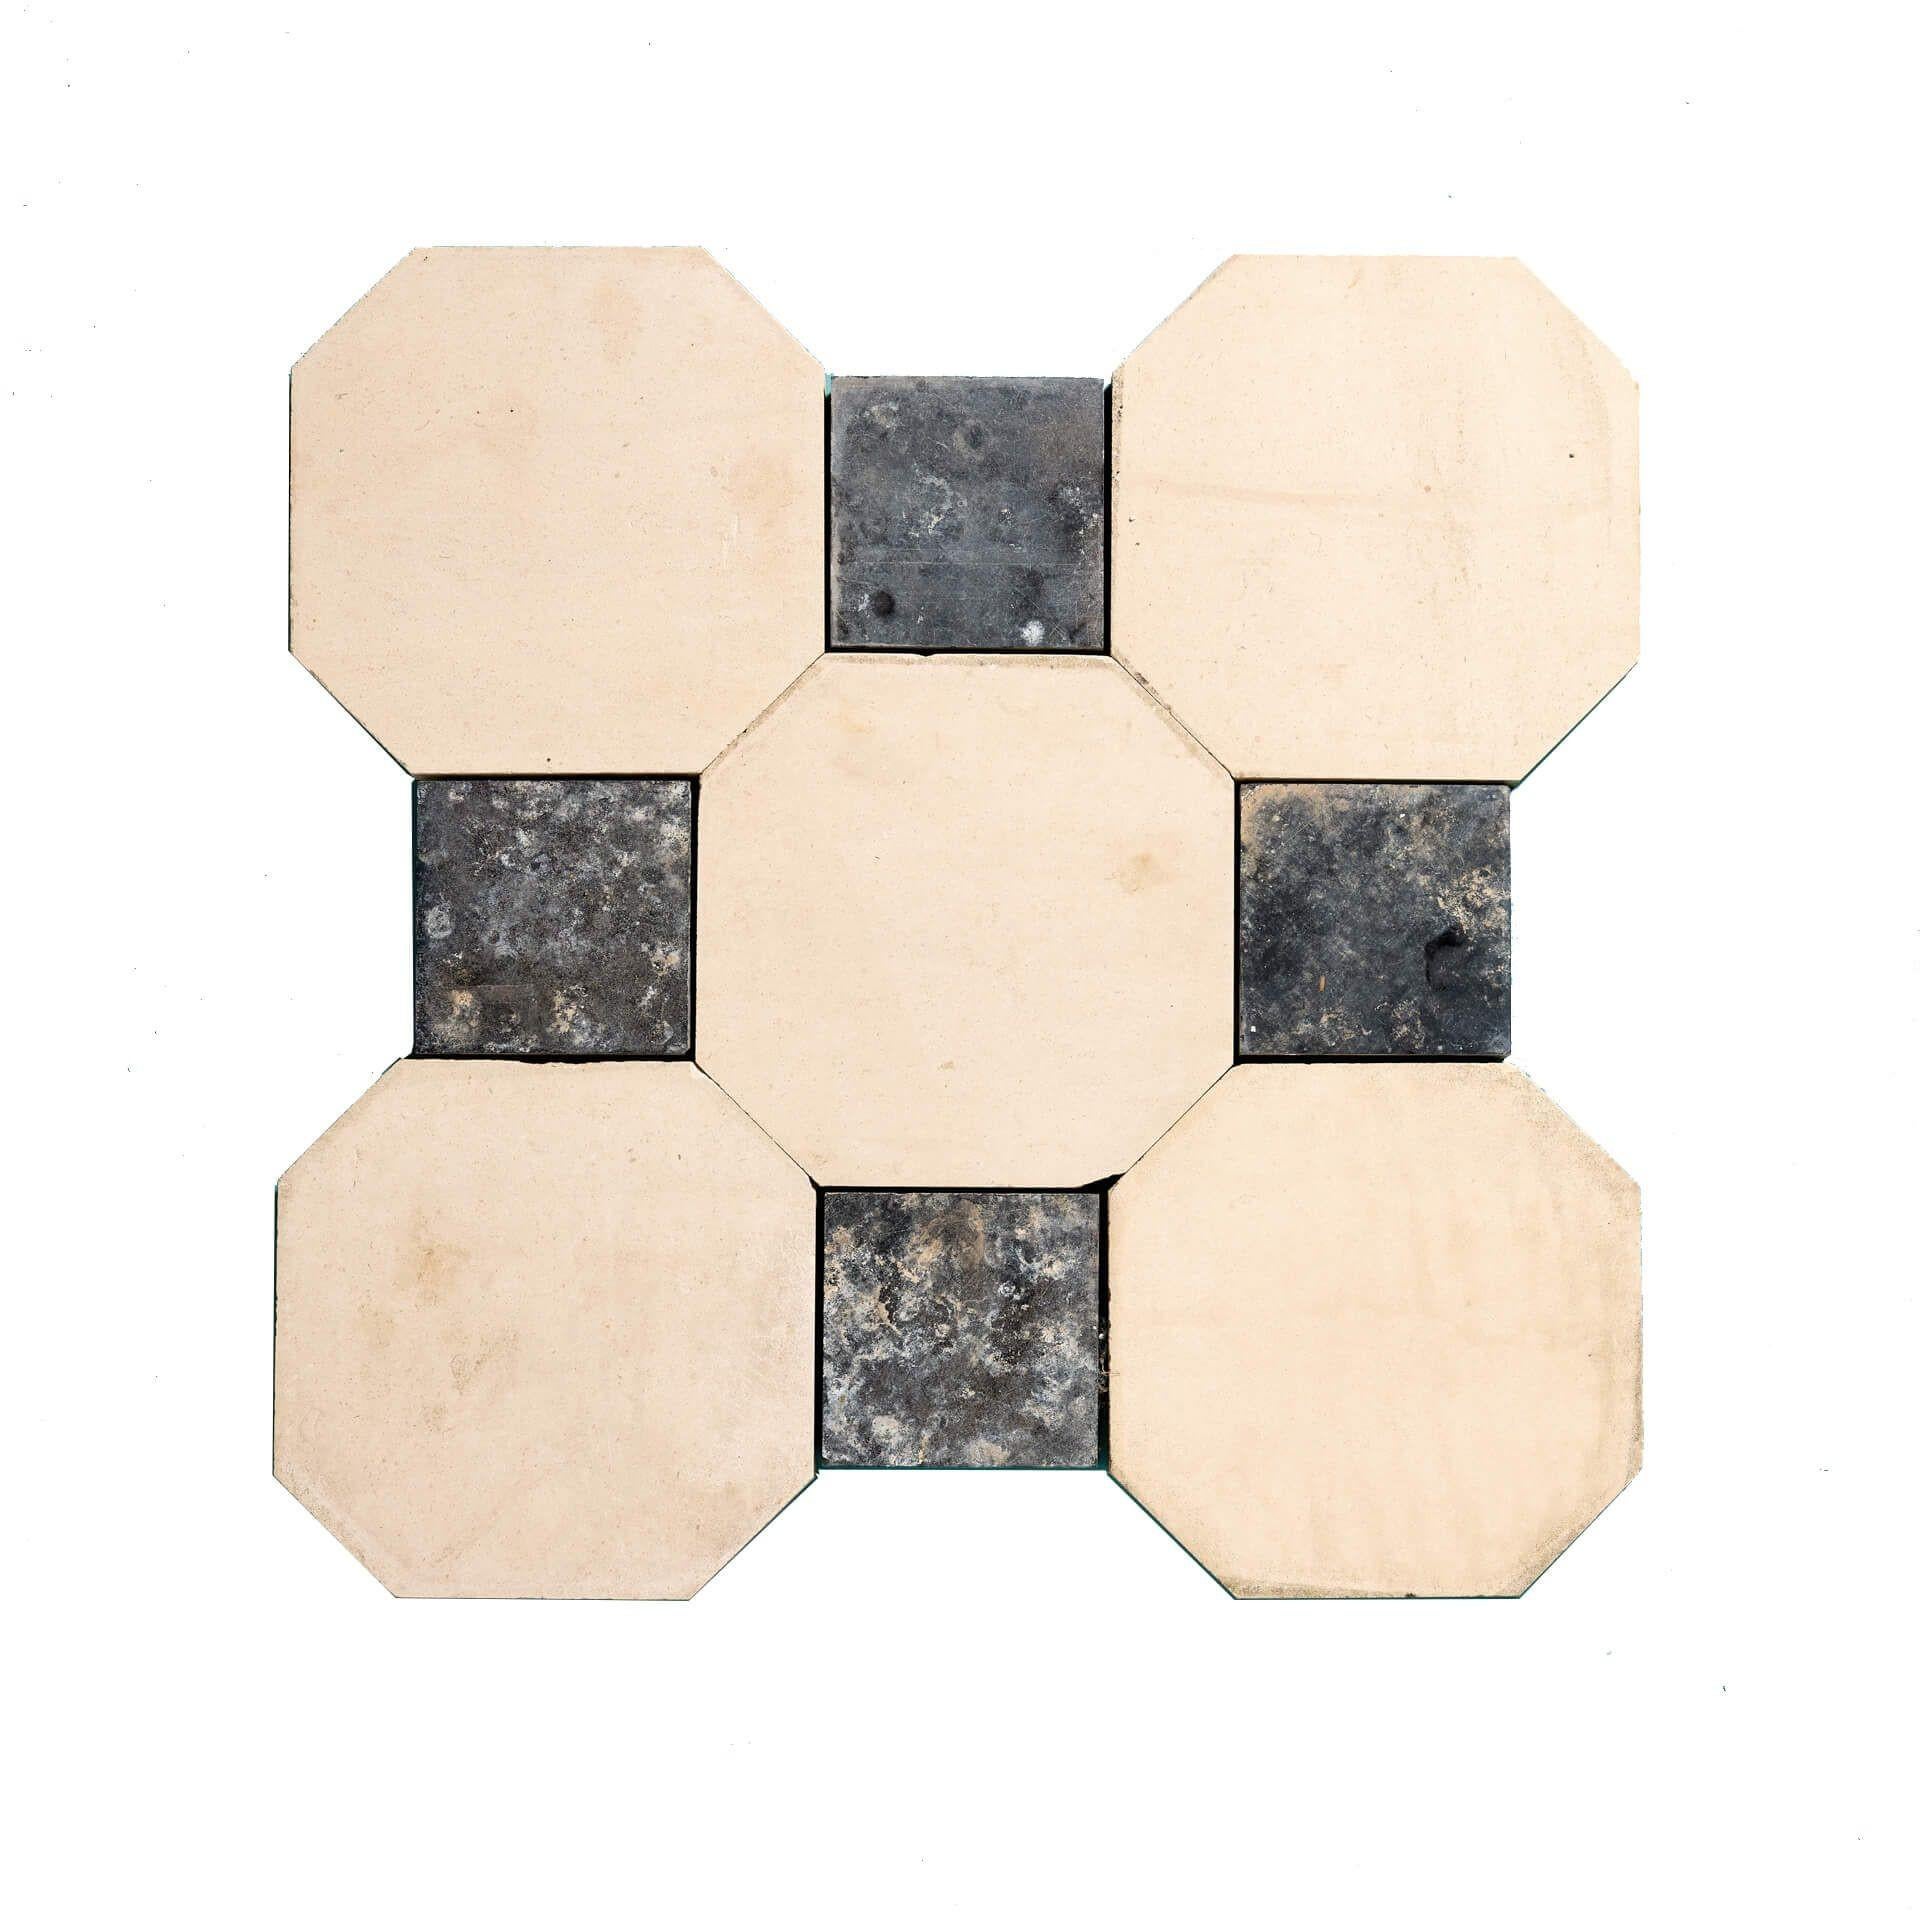 These mid 19th century limestone and slate stylish cabochon tiles were salvaged from Wingfield castle in England.

We have around 86 black tiles and 67 octagonal white tiles.

Dating from circa 1850, these reclaimed cabochon tiles certainly have a